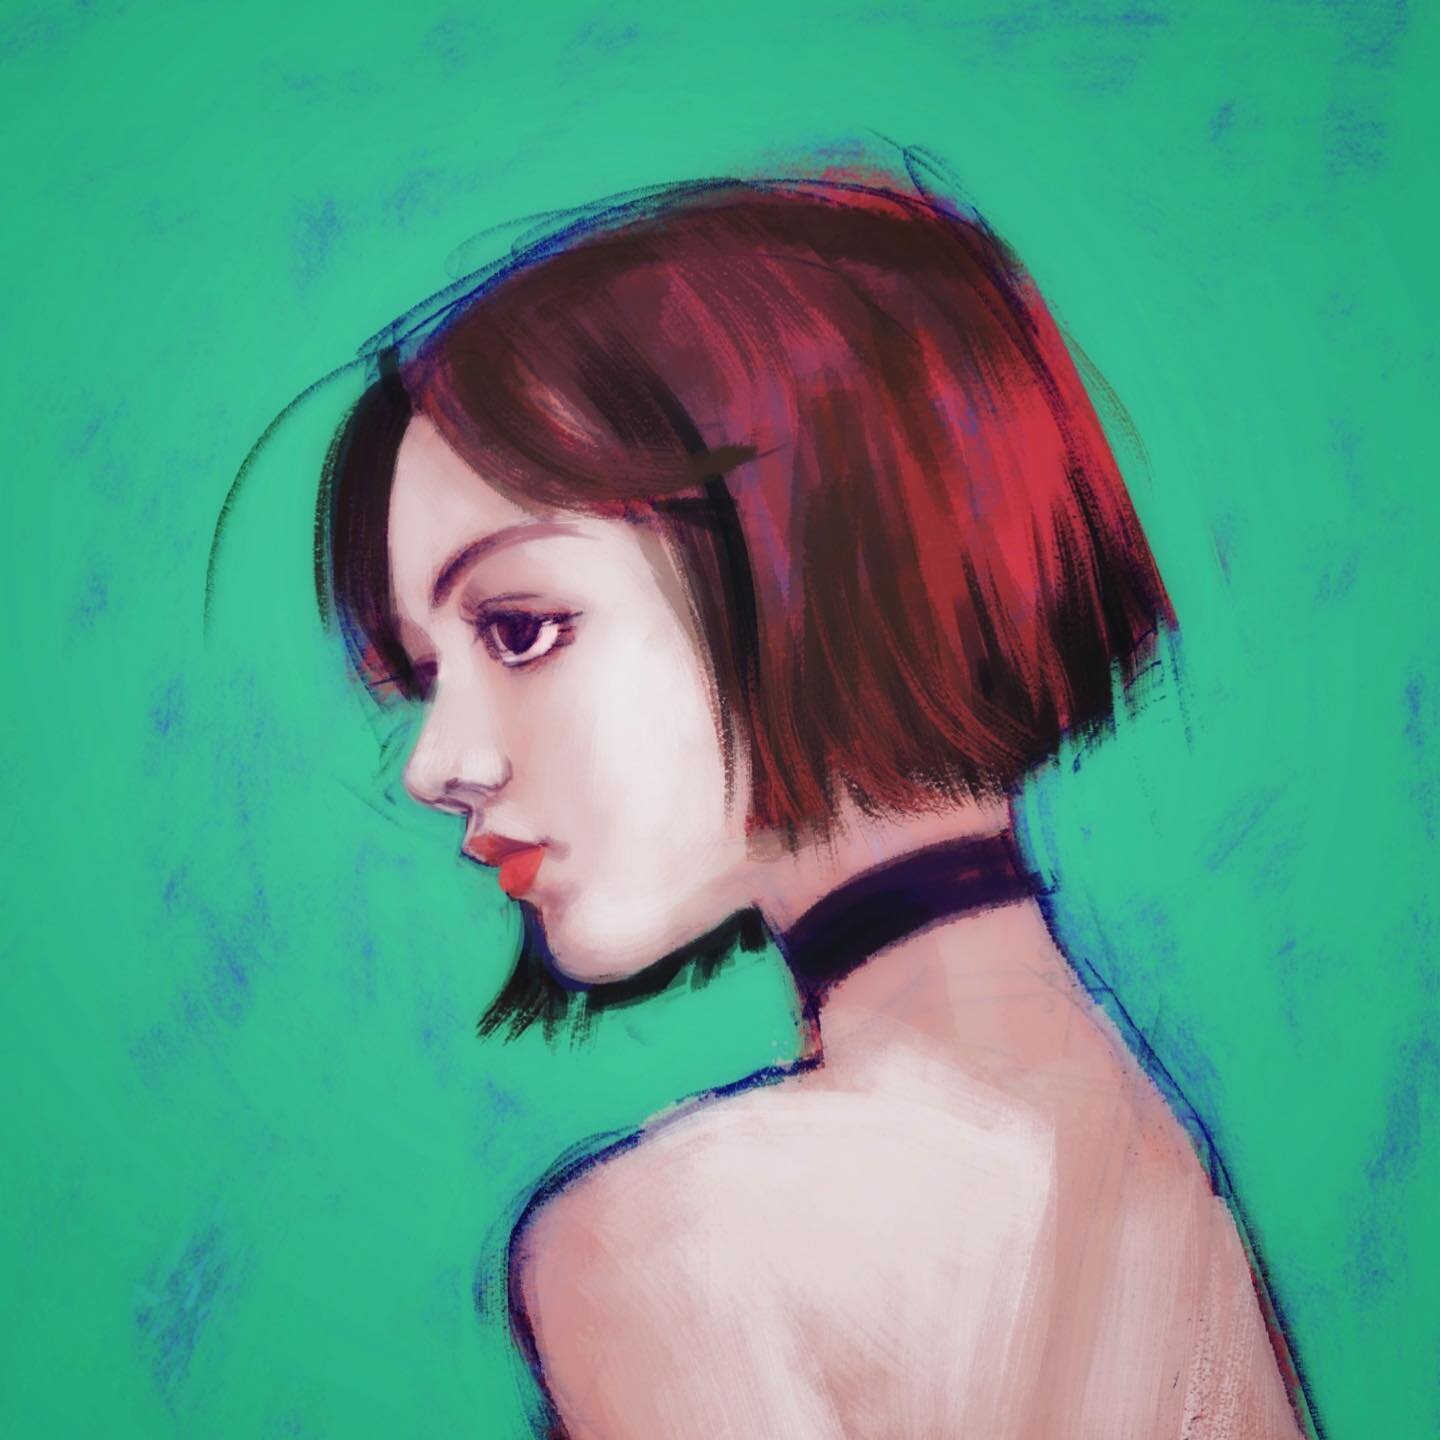 portrait practice again✍️🌈✨

I used Krita for the first time to make this and I really like it! I like the tools a lot, I&rsquo;ll have to try animating in it😳😤👌

#portraitpainting #portraitpractice #portrait #bobhaircut #coolgirl #illustration #